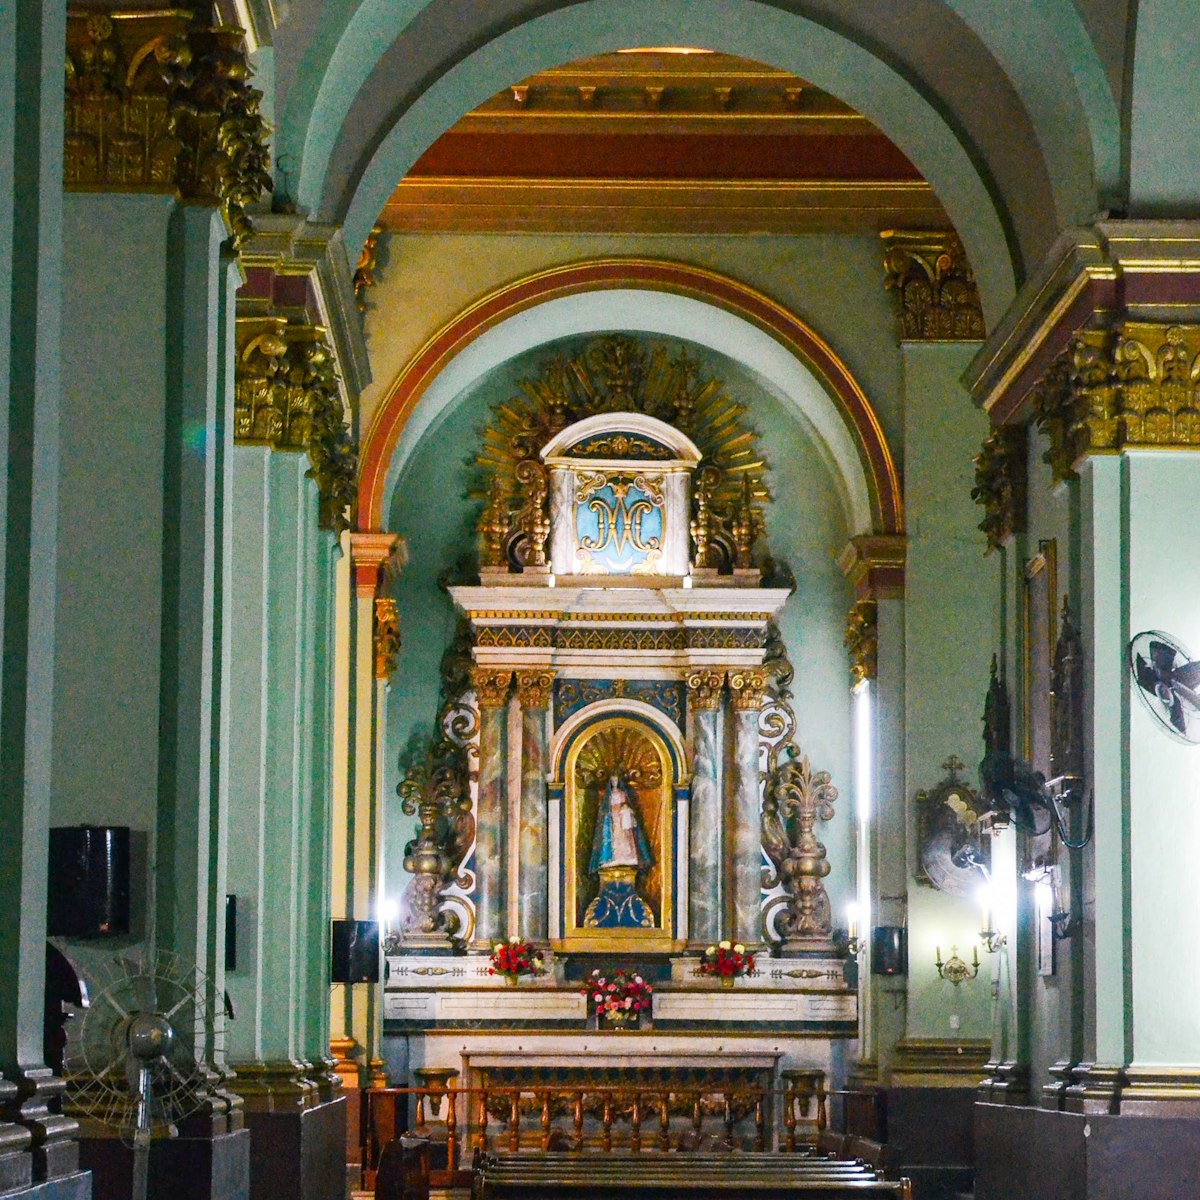 Inside the Basílica of Nuestra Señora del Valle (Our Lady of the Valley) Cathedral.